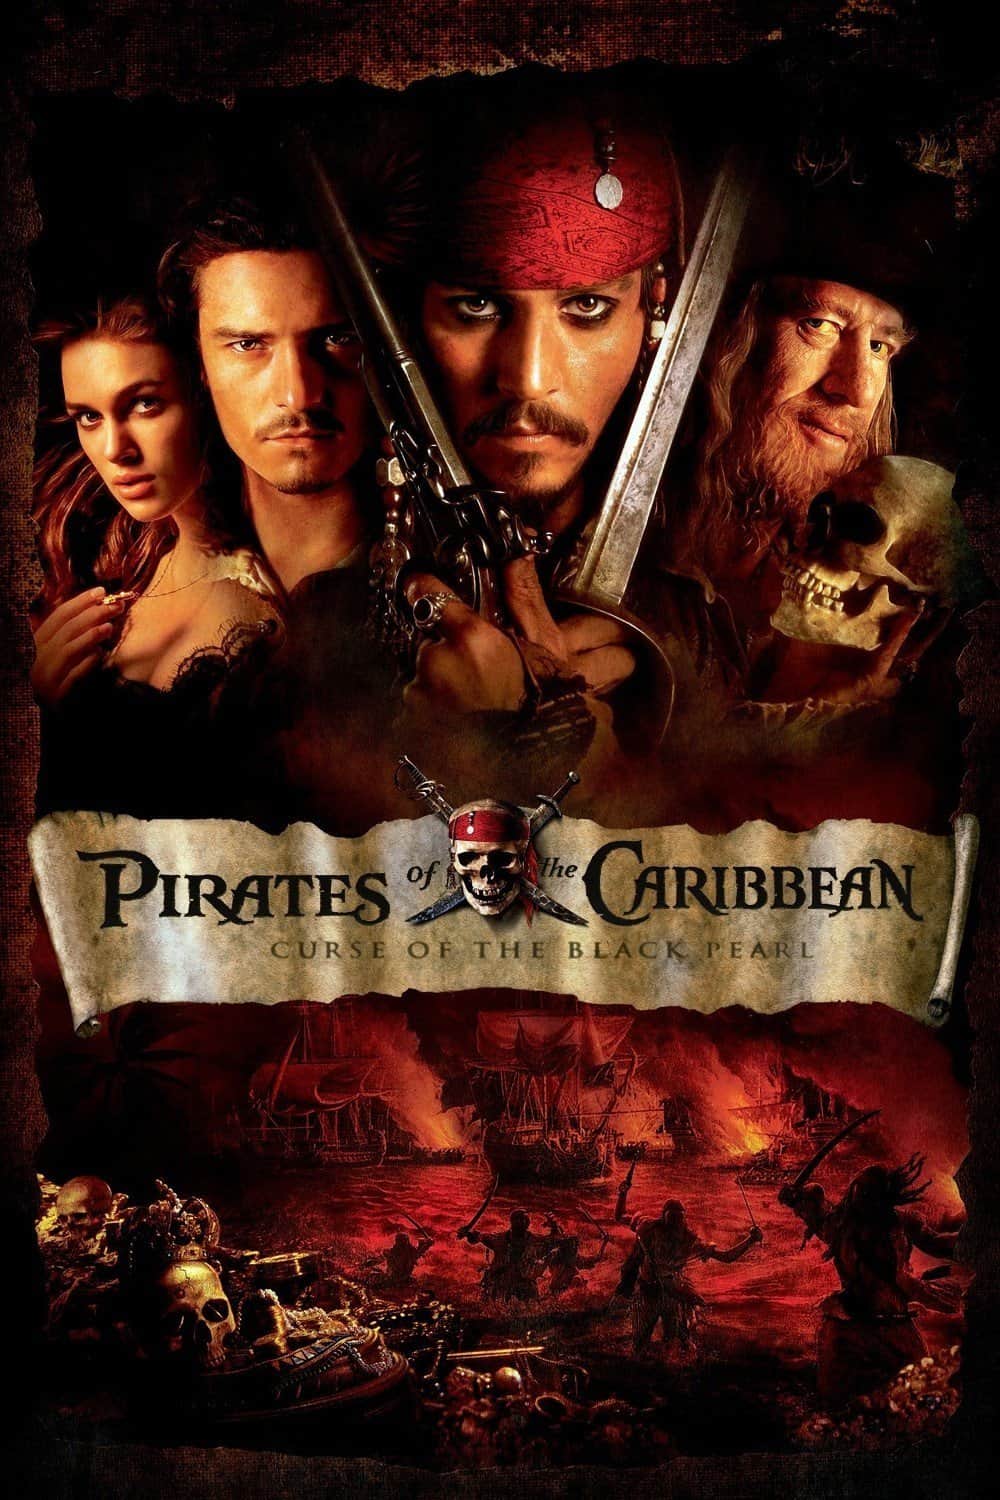 Pirates of the Caribbean: The Curse of the Black Pearl, 2003 